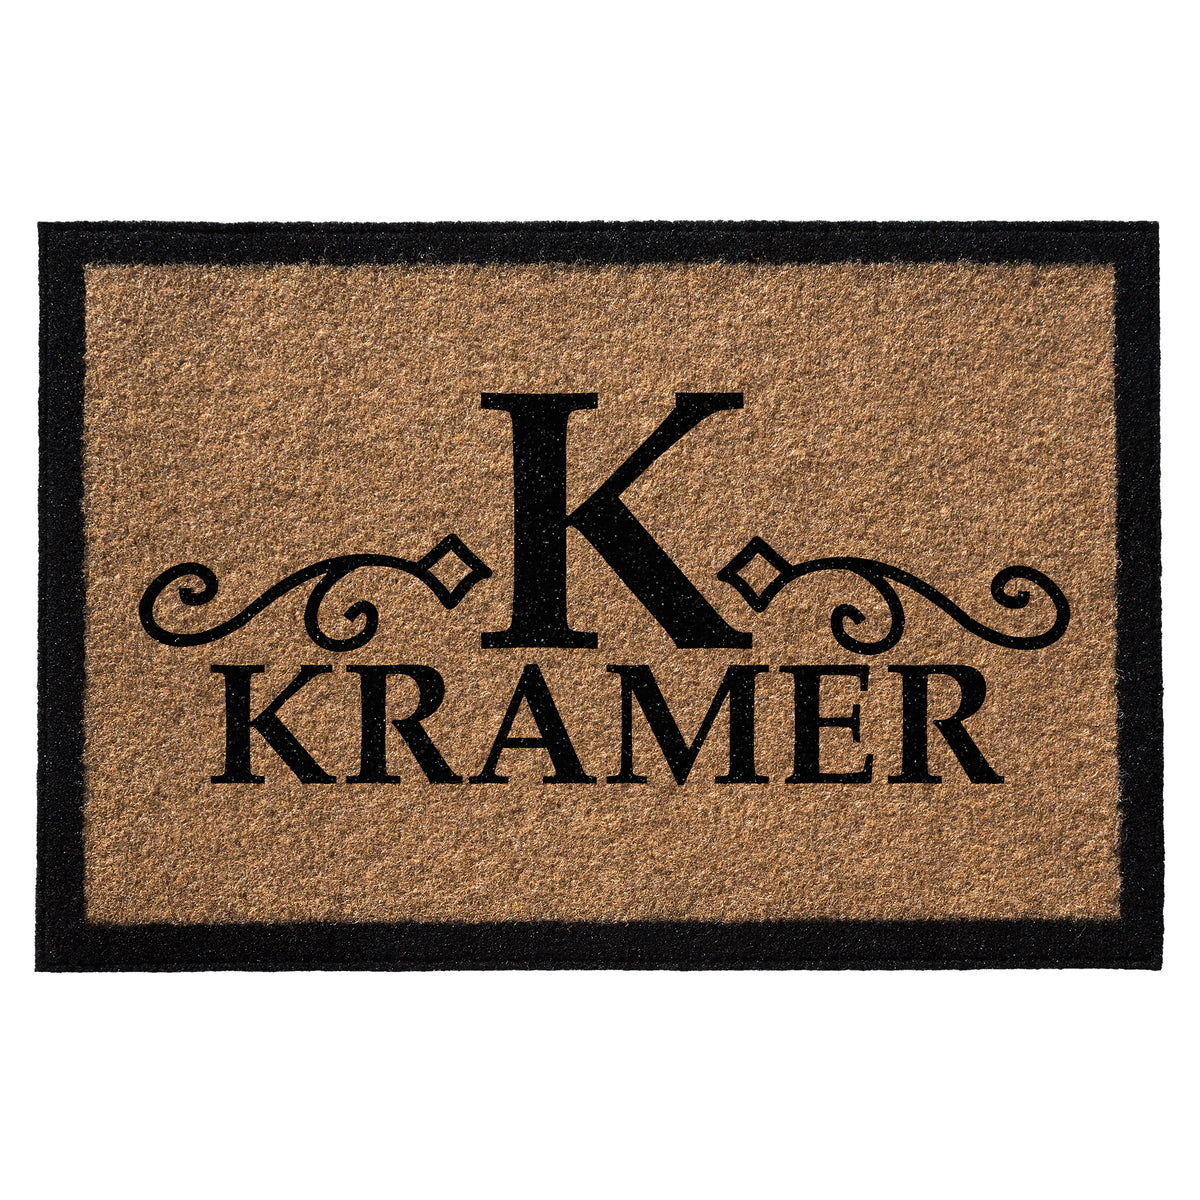 Infinity Custom Mats™ All-Weather Personalized Door Mat - STYLE: KRAMER COLOR: TAN - rugsthatfit.com